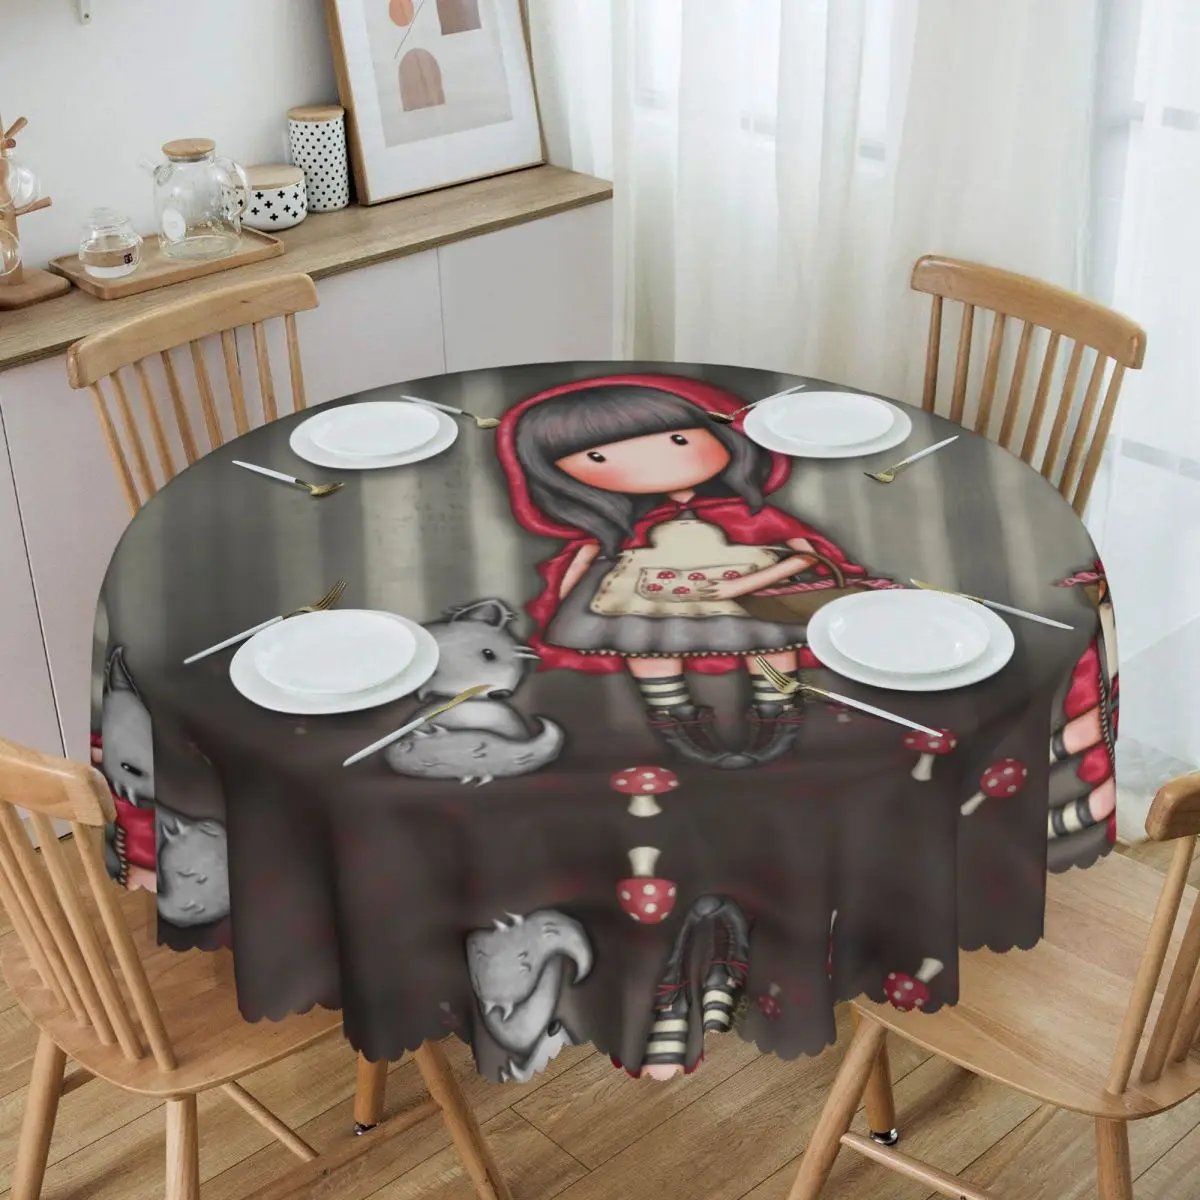 

Round Coque Art Cartoon Santoro Gorjuss Table Cloth Waterproof Tablecloth 60 inch Table Cover for Kitchen Dinning